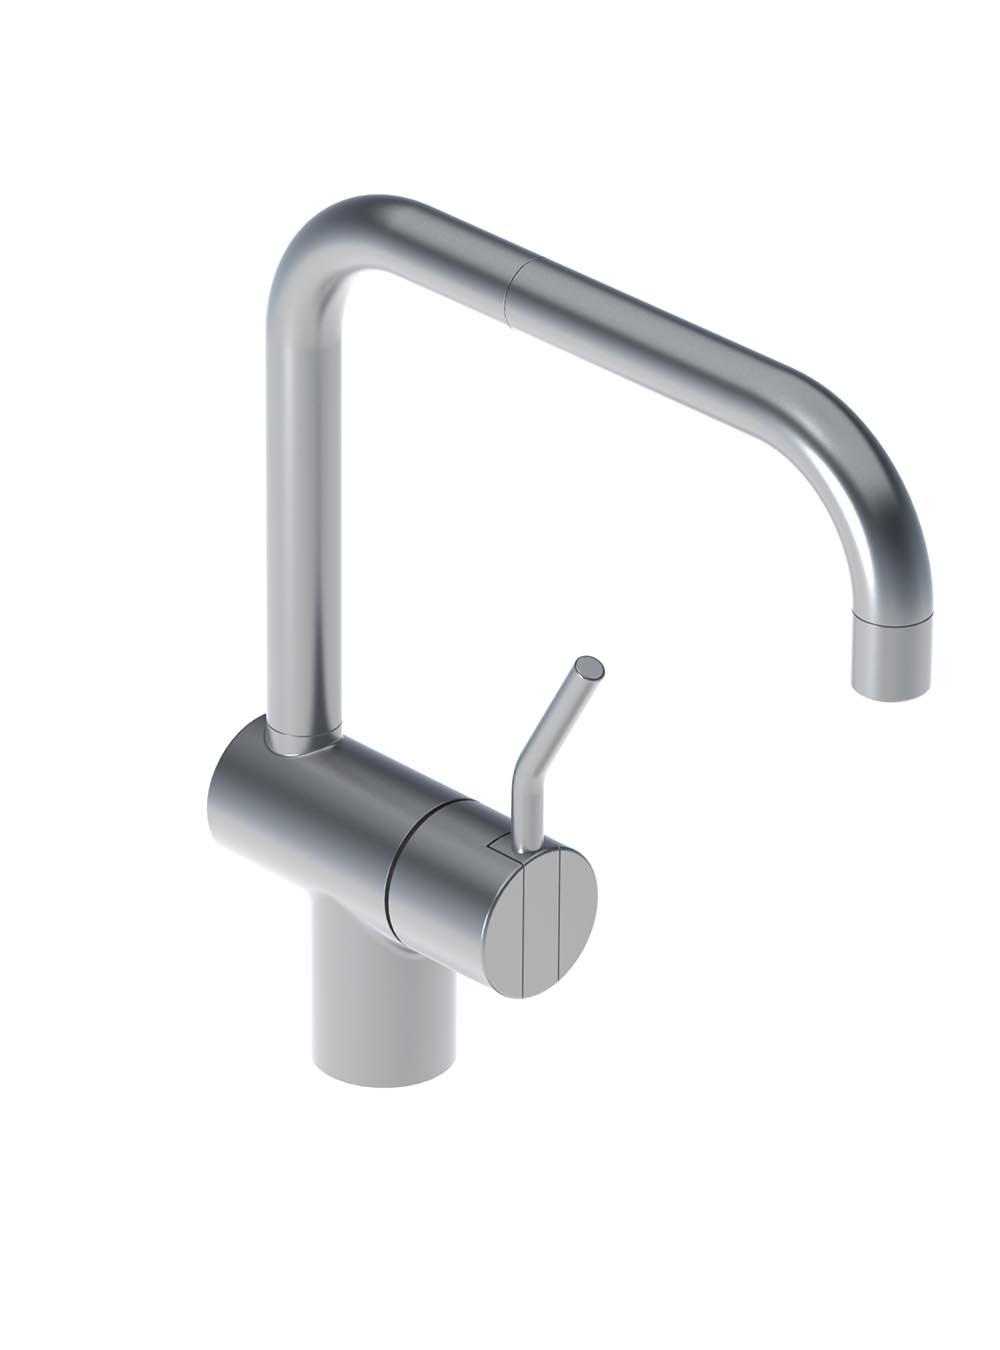 KV1EBM: One-handle vented mixer with ceramic disc technology and  medium lever, double swivel spout.